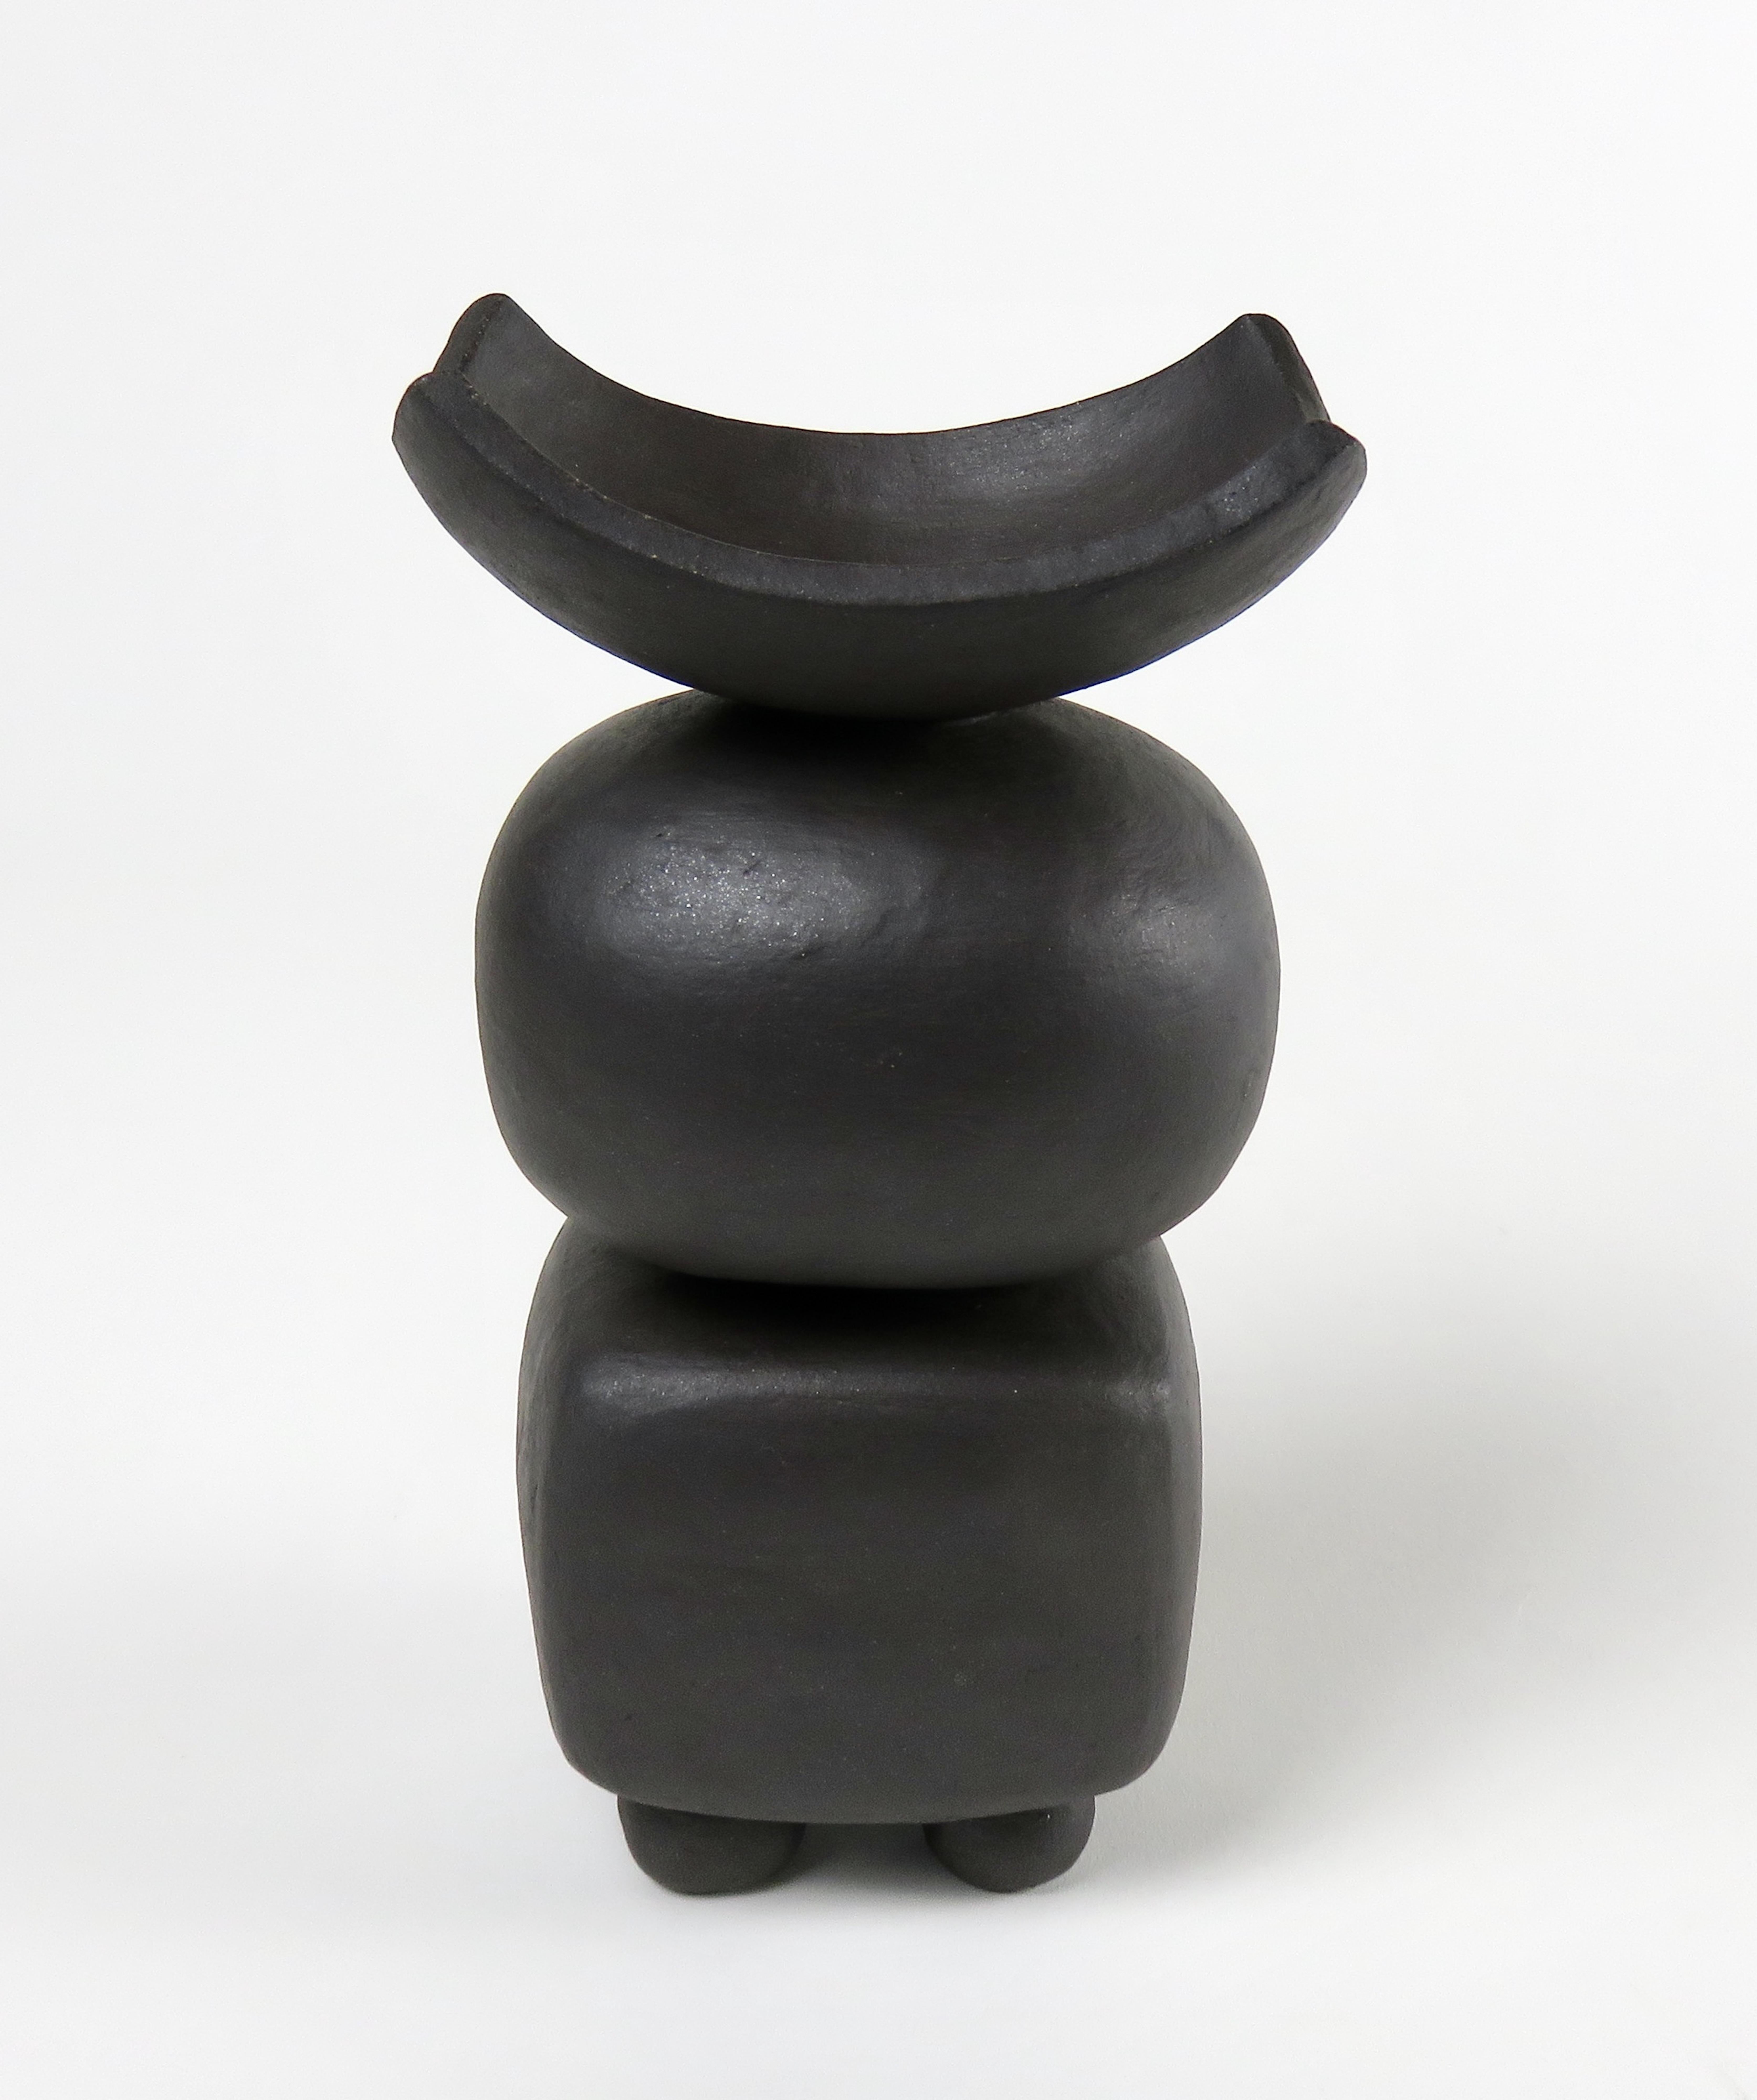 This new series of Modern TOTEMS consisting of soft round or rectangular forms on small feet. The shapes are formed of a solid piece, then hollowed out, stacked and placed on feet. A black slip is applied by brush and the pieces are fired twice.